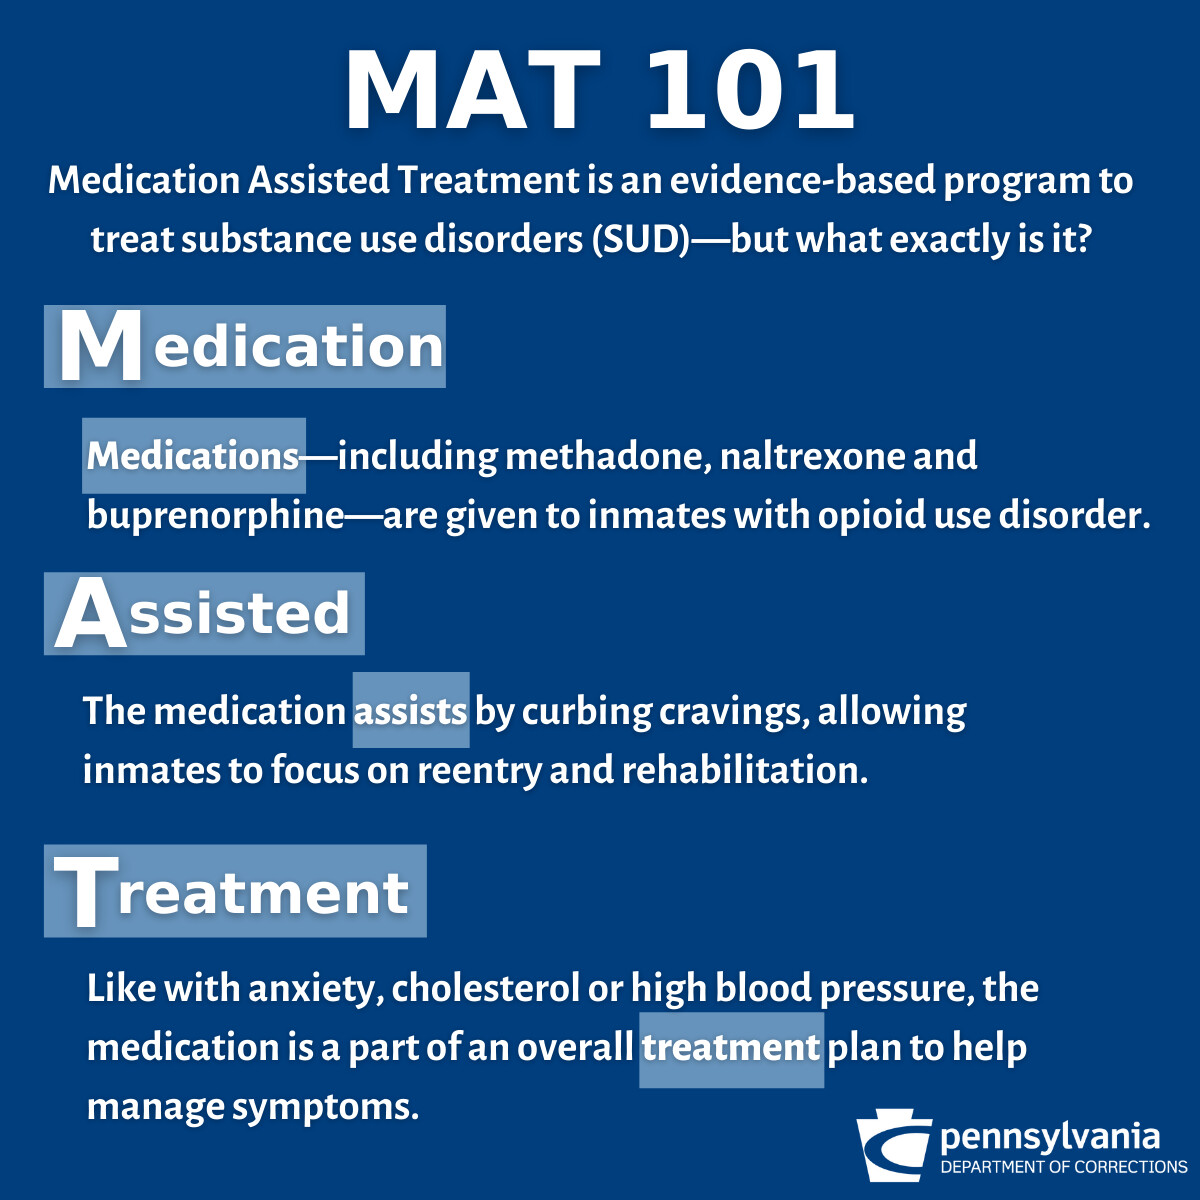 MAT Medications, Counseling, and Related Conditions - StoryMD